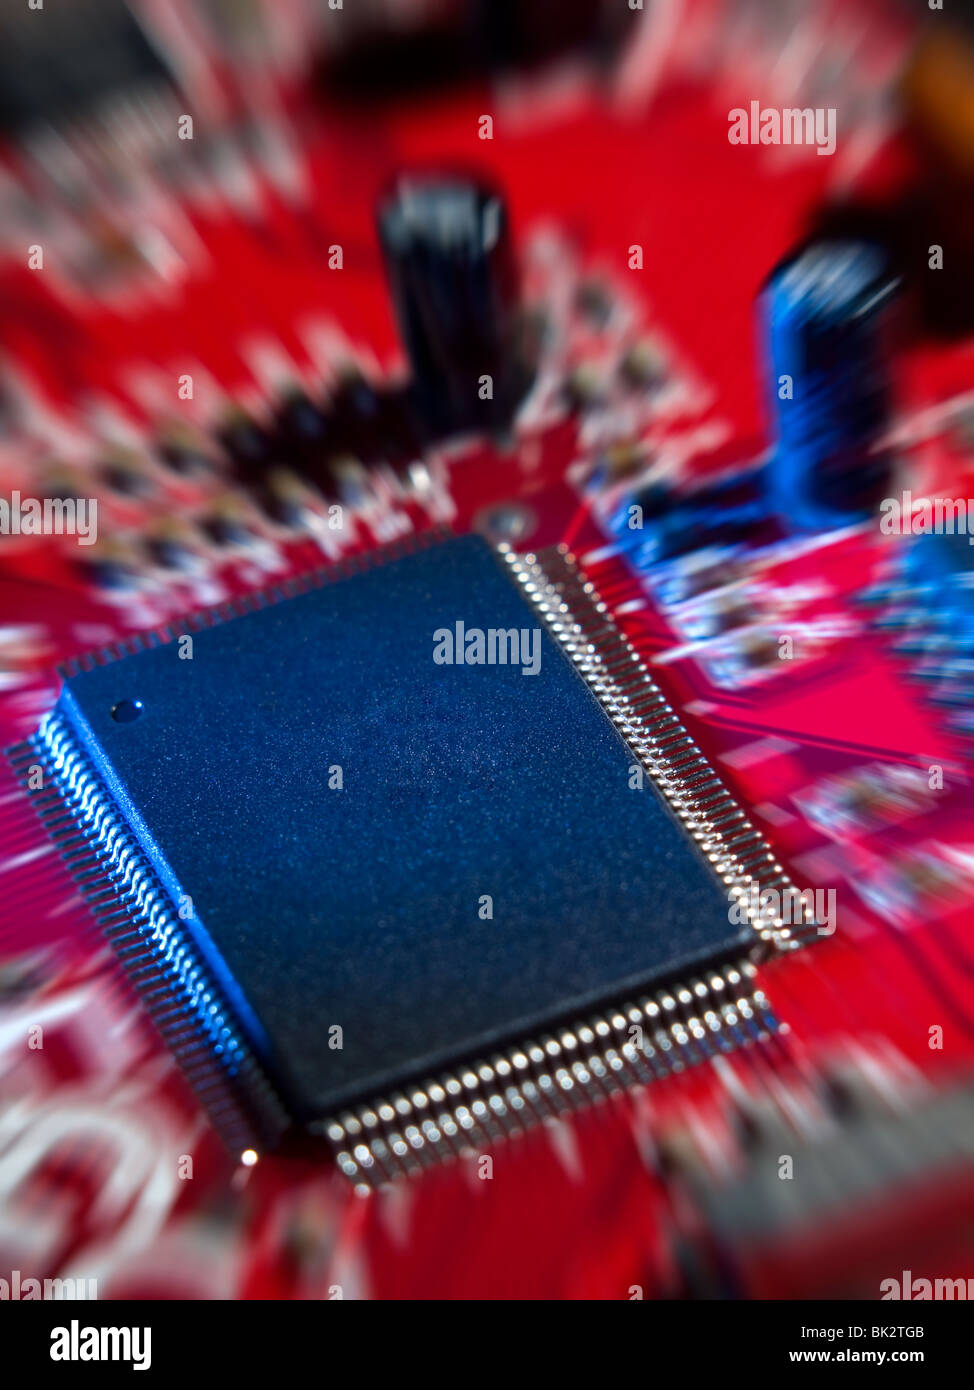 Zoom in on red computer circuit board with memory chip. Stock Photo